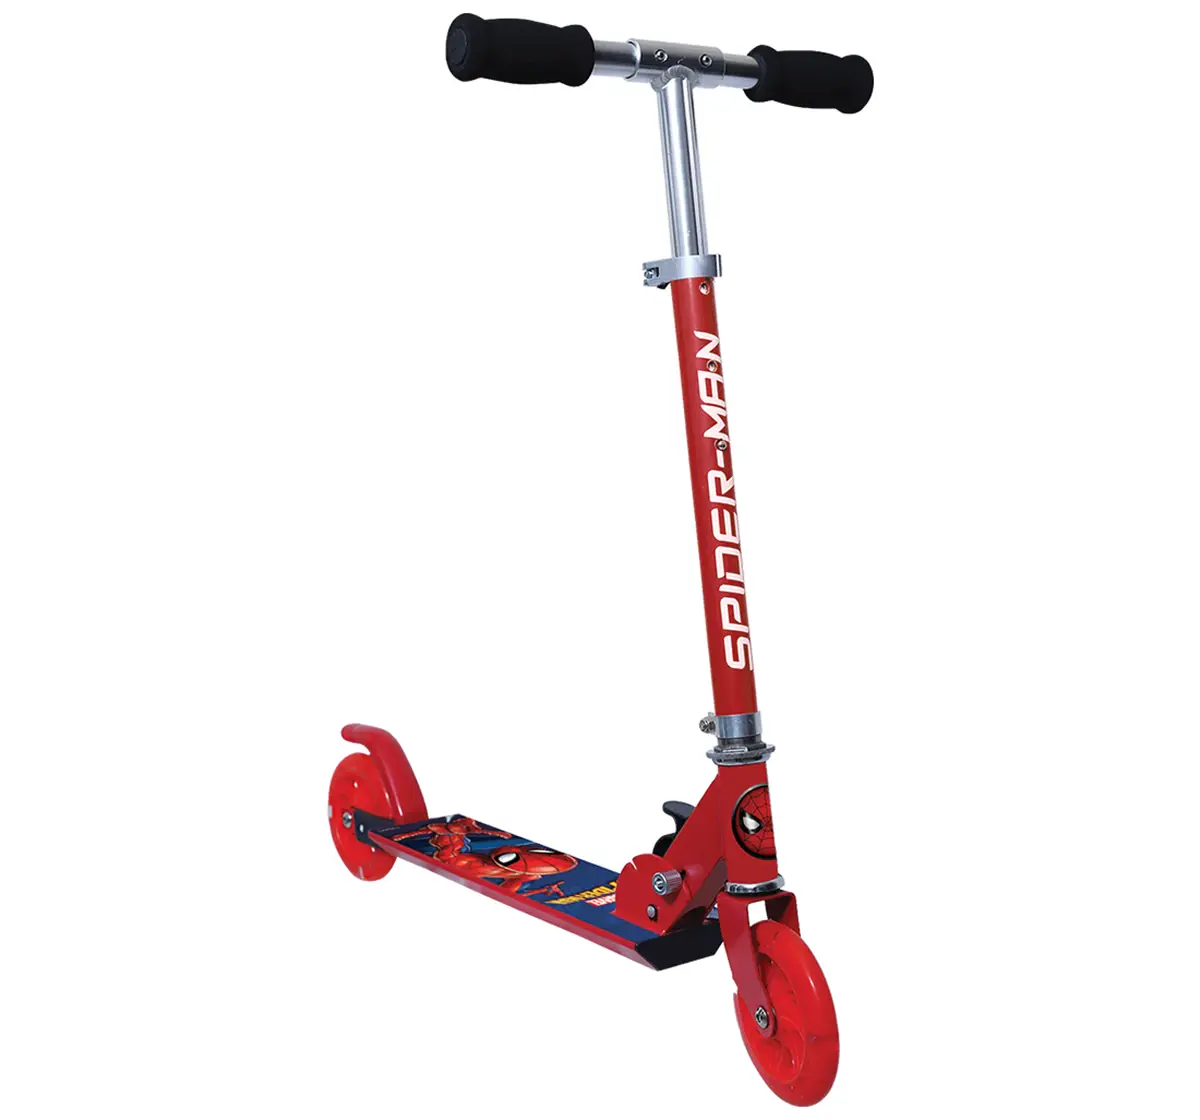 Shop Online Spiderman 2-Wheel Scooter for Kids age 4Y+, Red